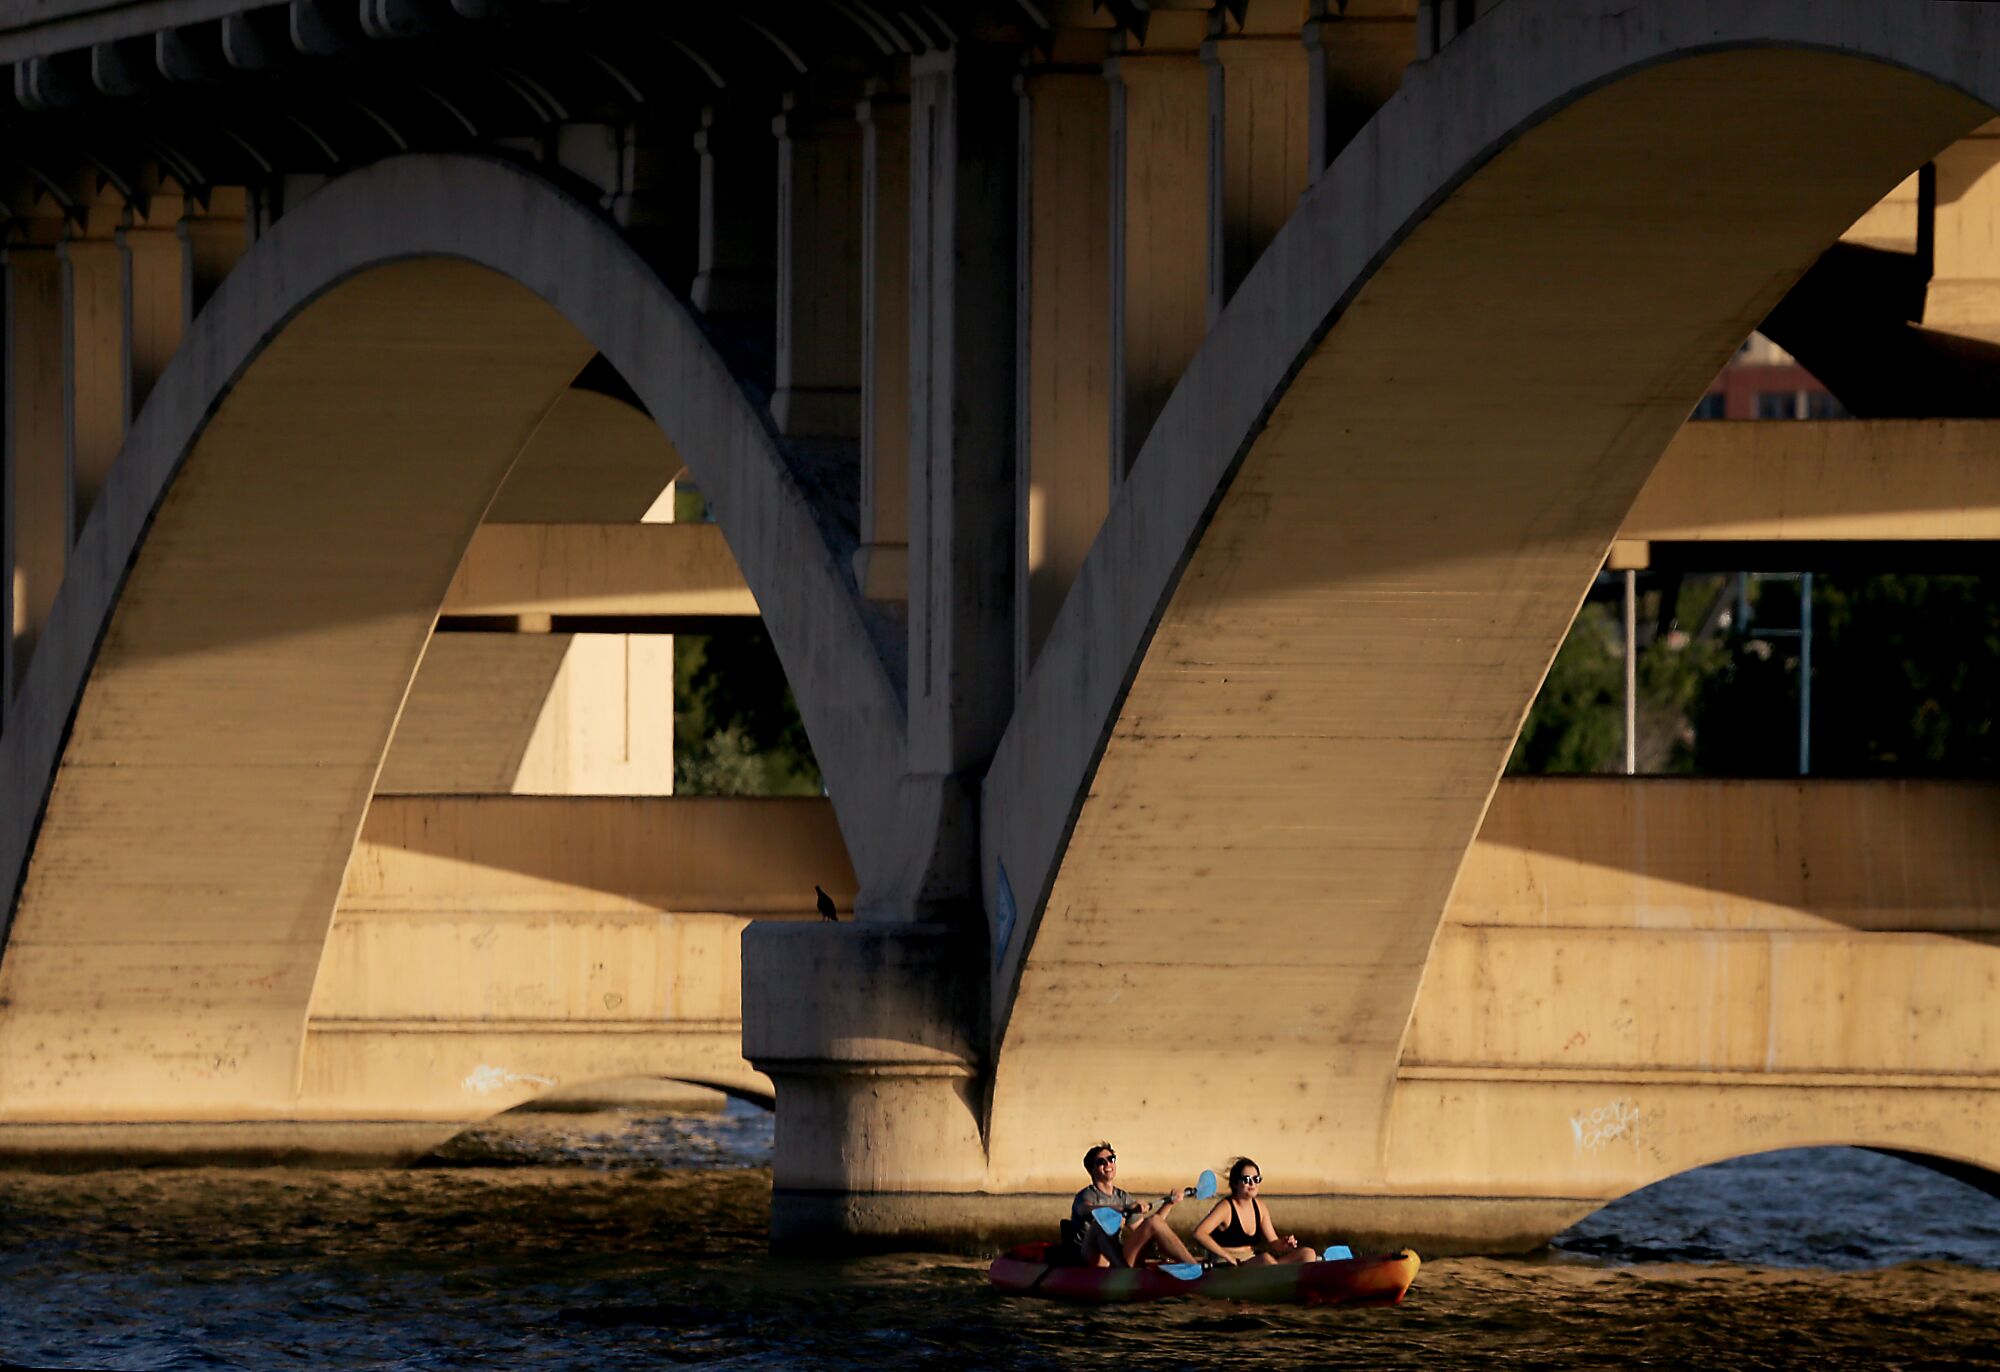 Kayakers navigate Tempe Town Lake, an artificial body of water that contains Colorado River water.